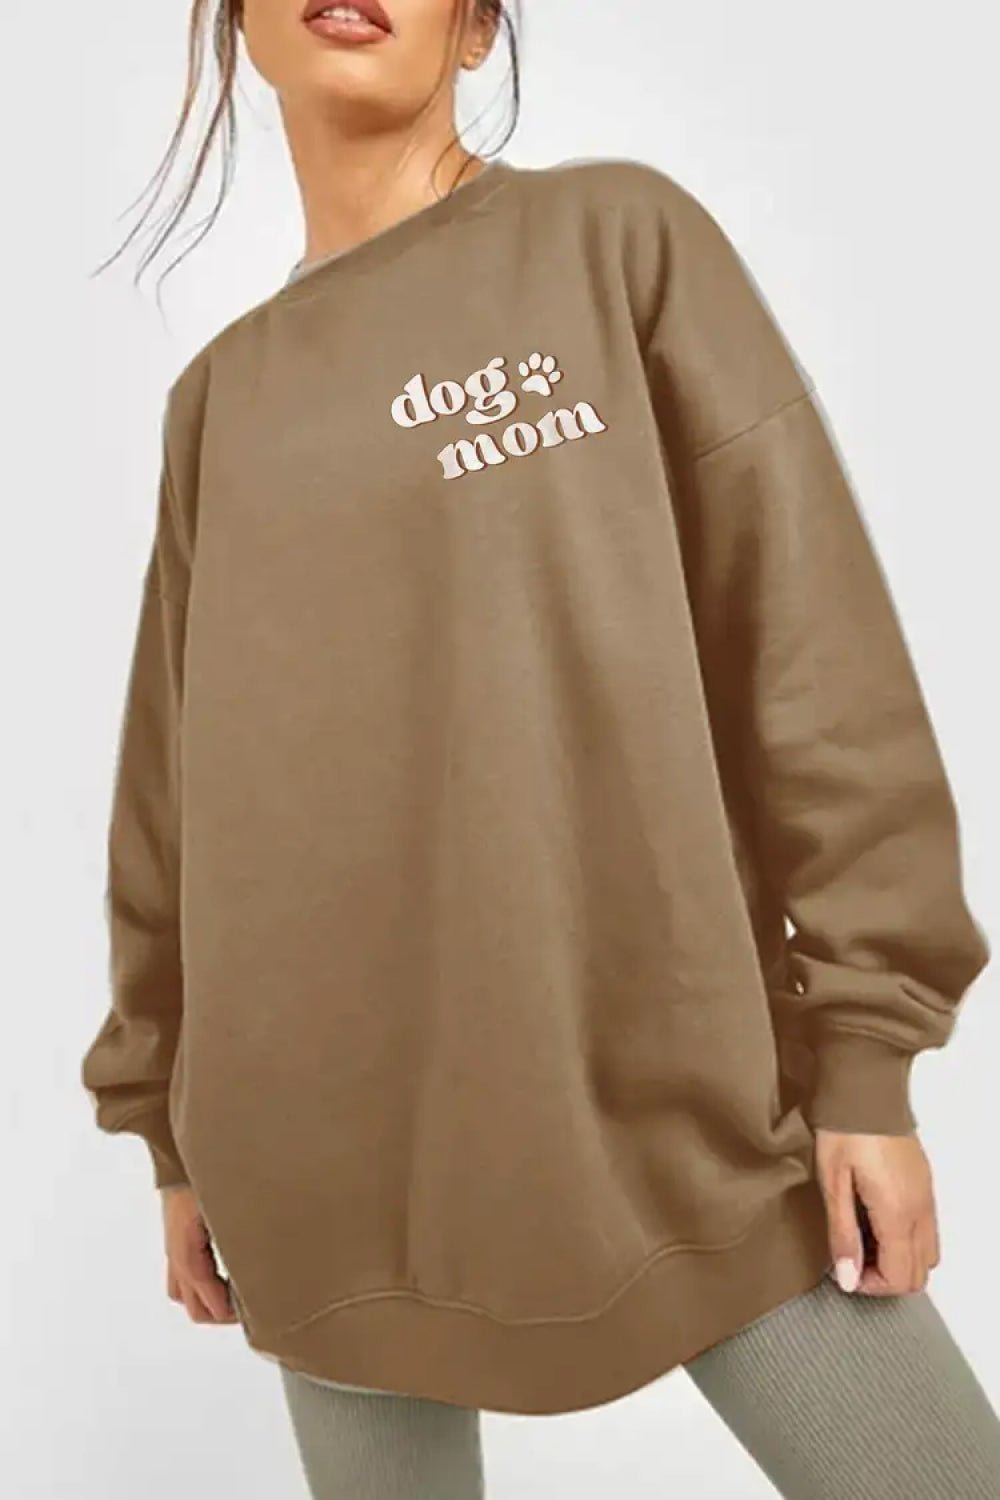 Simply Love Simply Love Full Size Round Neck Dropped Shoulder DOG MOM Graphic Sweatshirt - GemThreads Boutique